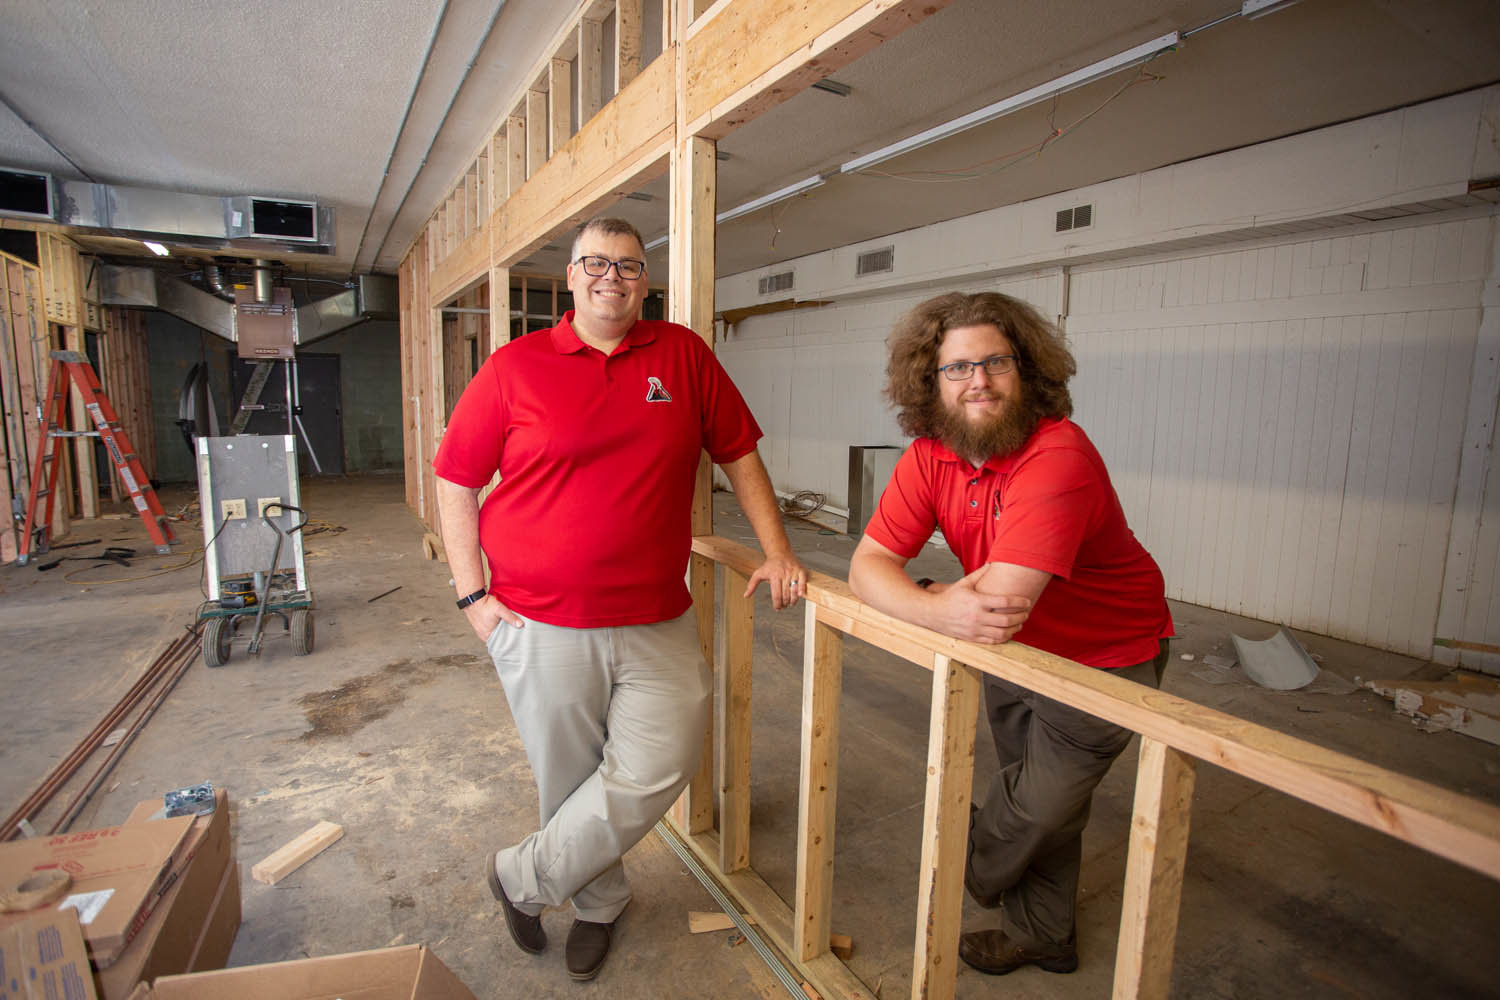 PREPARATIONS: Prehistoric Brewing Co. co-owners Keith Davis, left, and Charley Norton anticipate a January opening for their brewery in the Plaza Shopping Center.